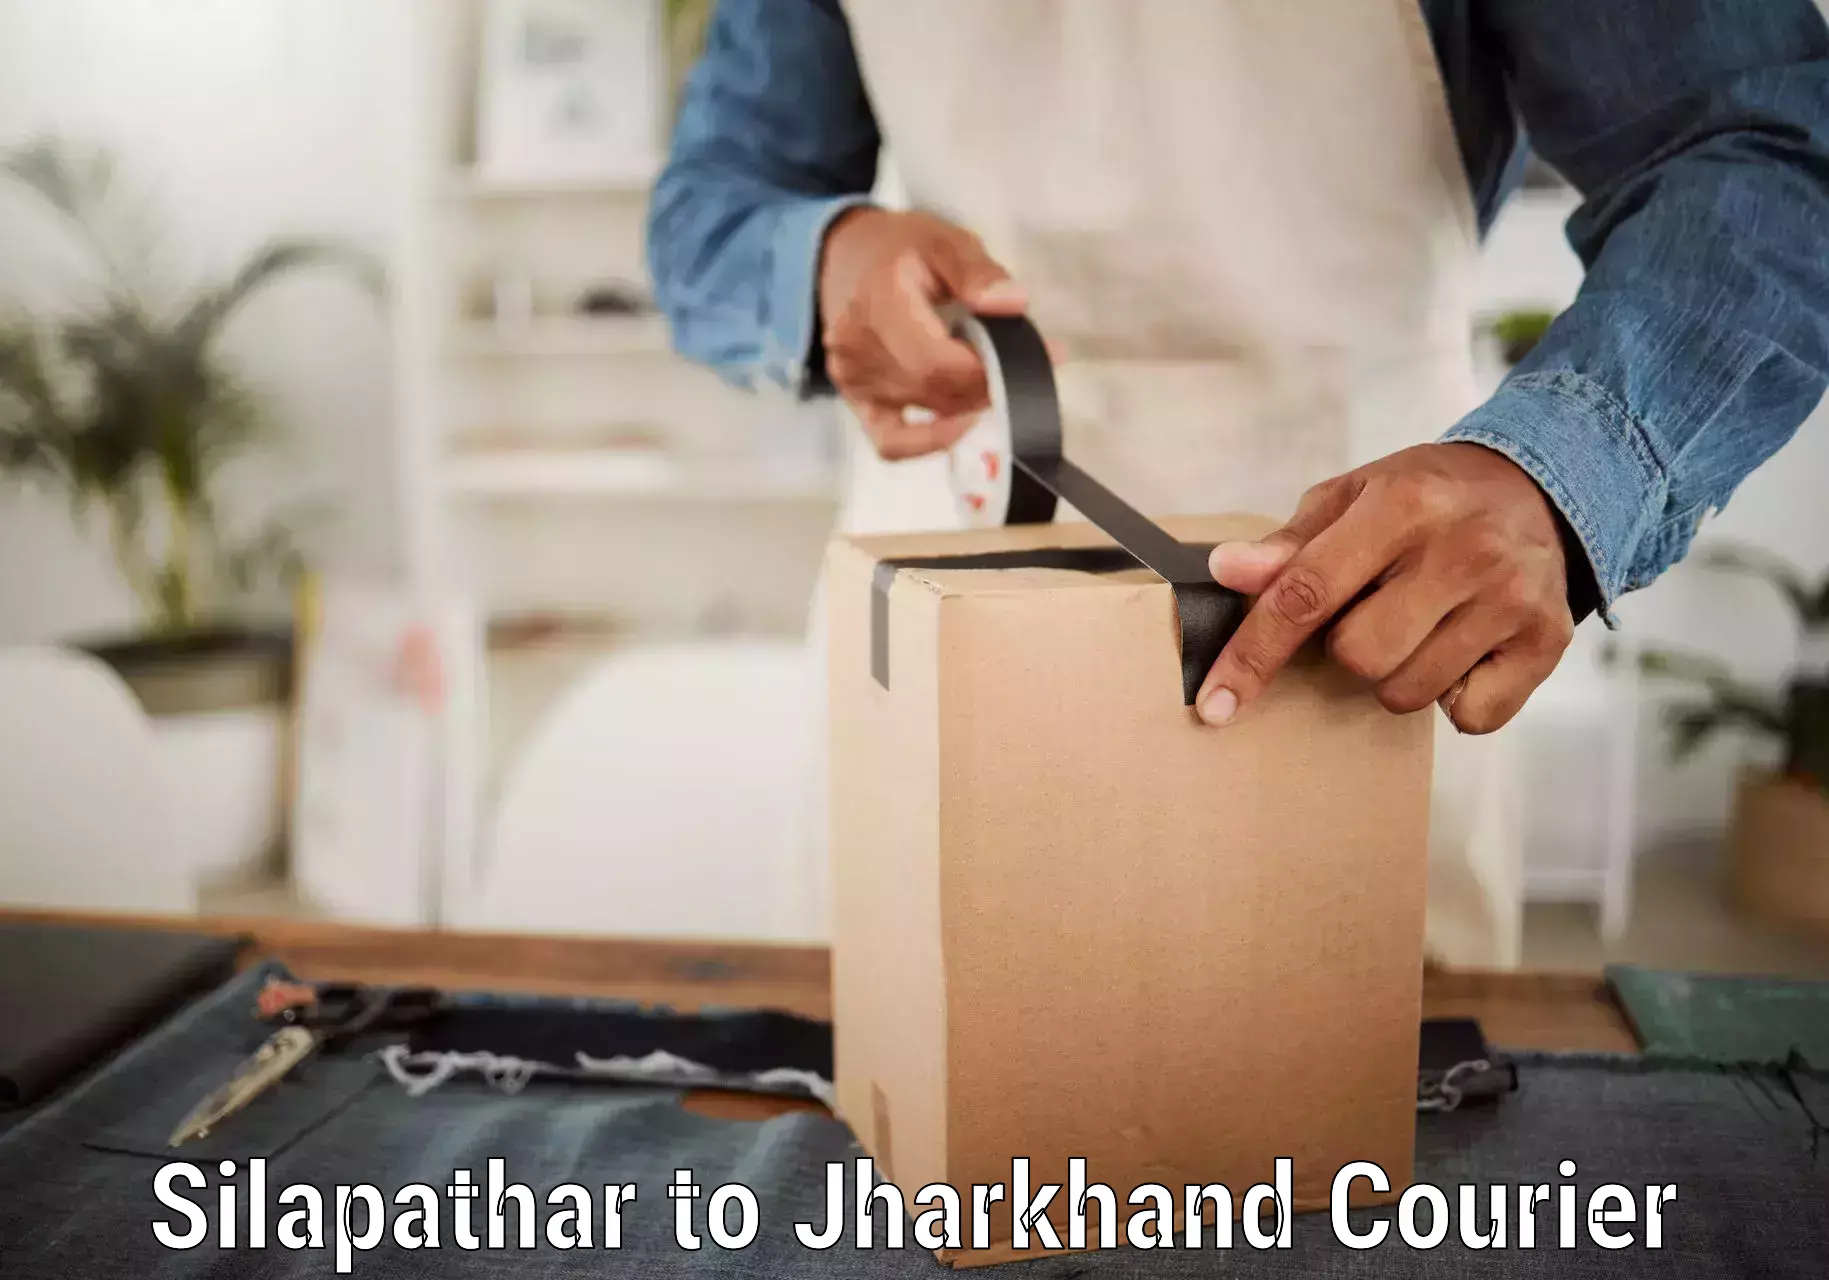 Express mail service Silapathar to Jharkhand